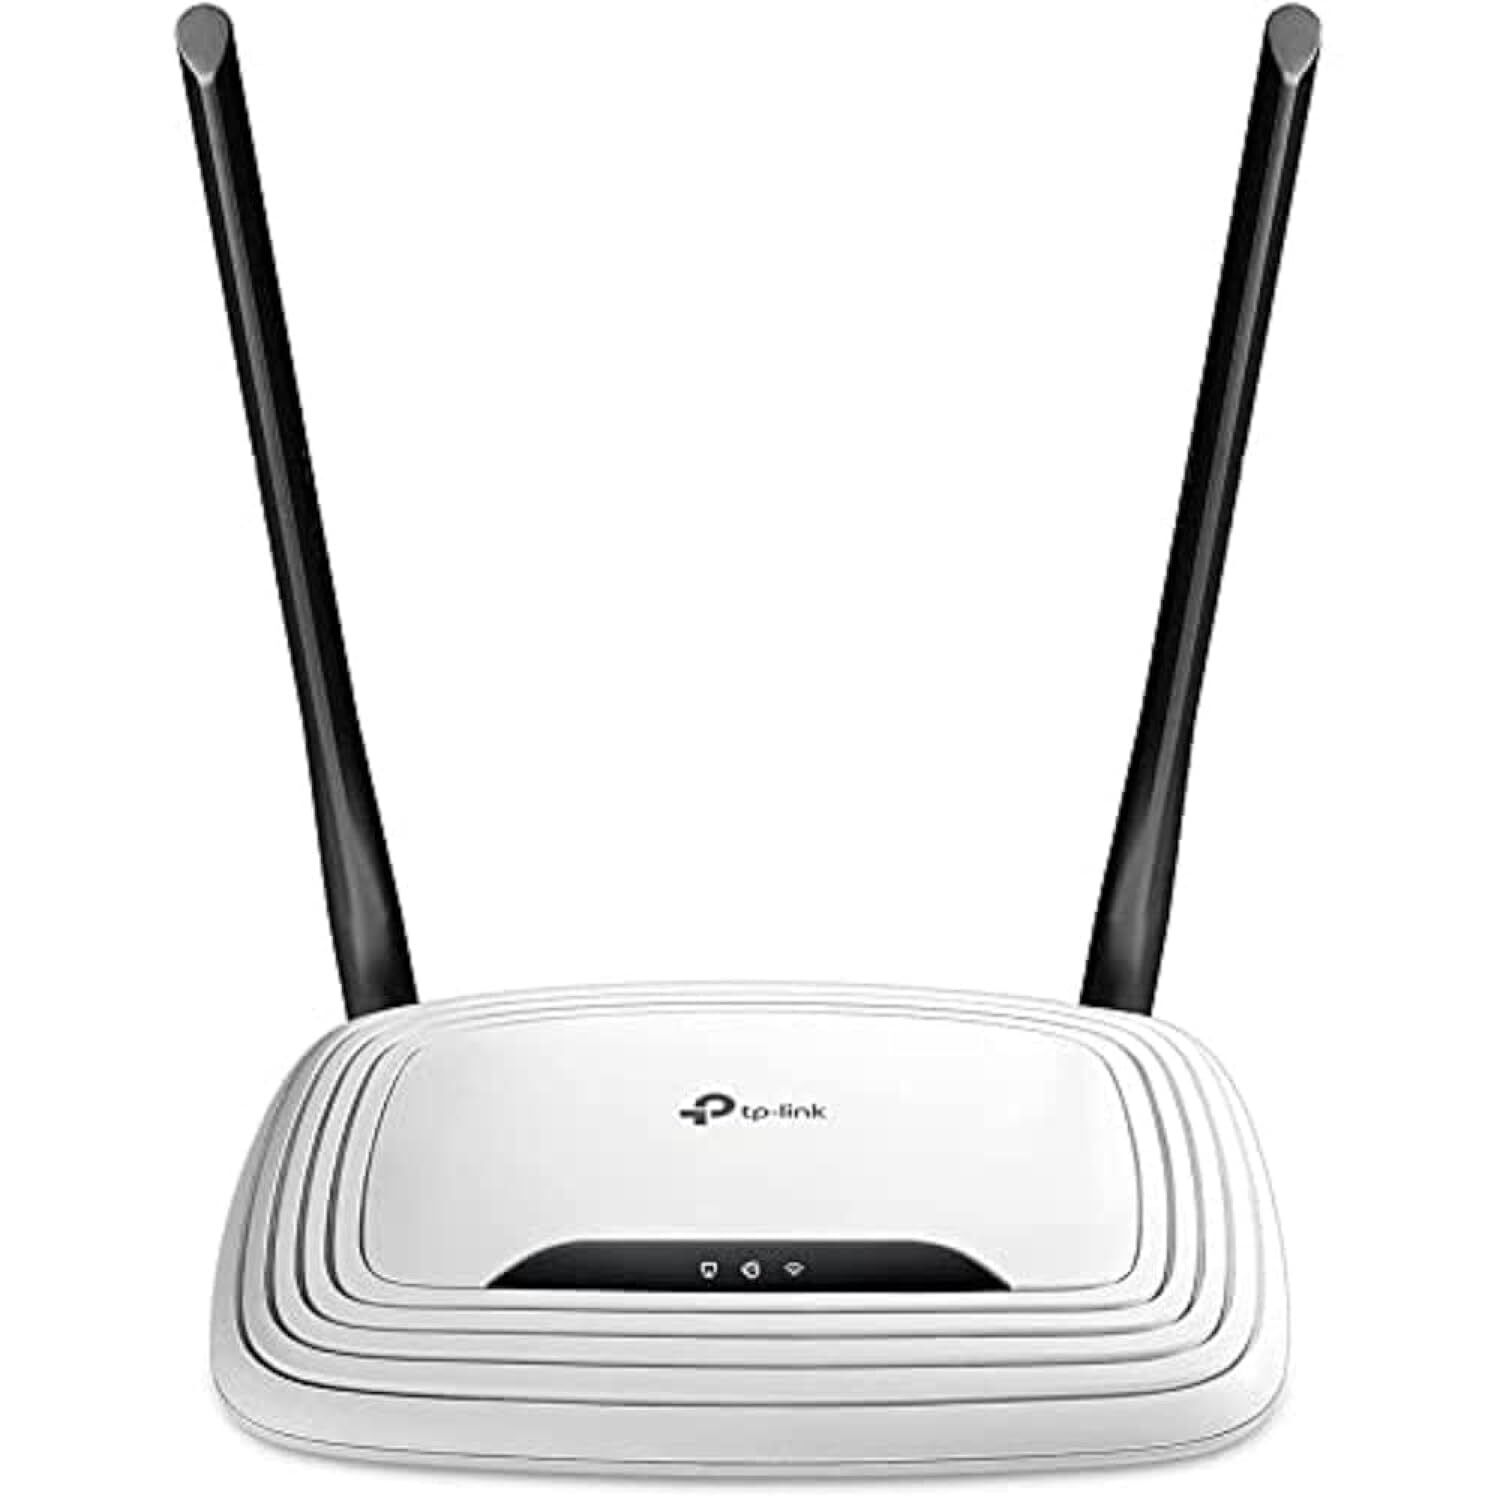 TP-Link N300 Wireless Extender, Wi-Fi Router (TL-WR841N) - 2 x 5dBi High Power